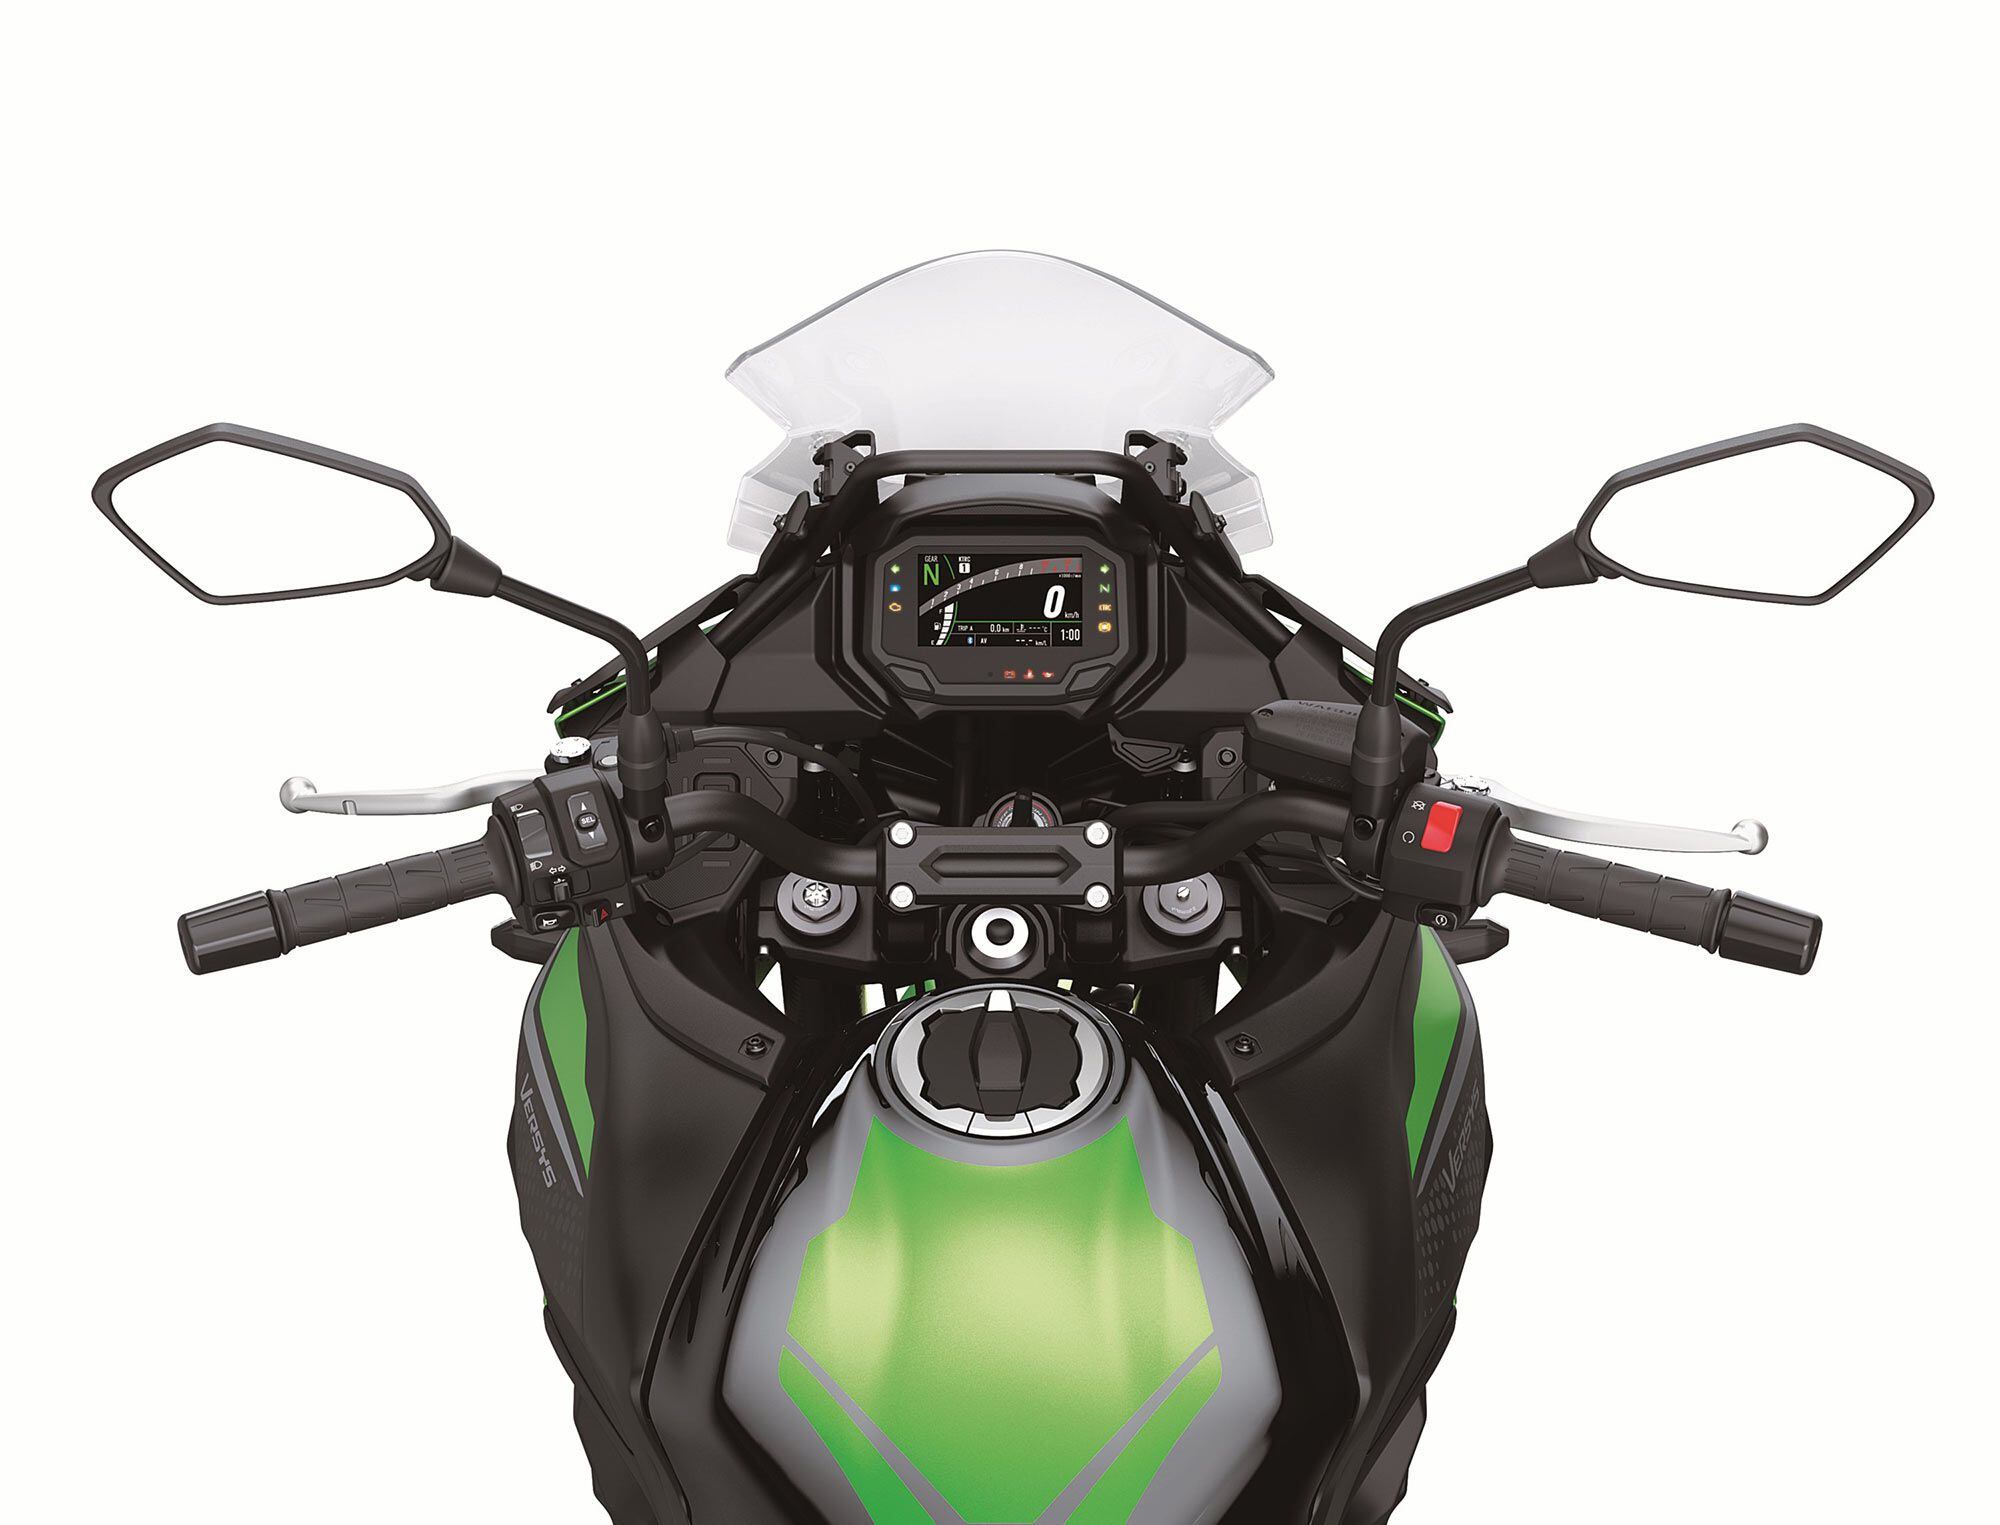 Kawasaki added a new four-way-adjustable windscreen to the Versys 650 and 650 LT.